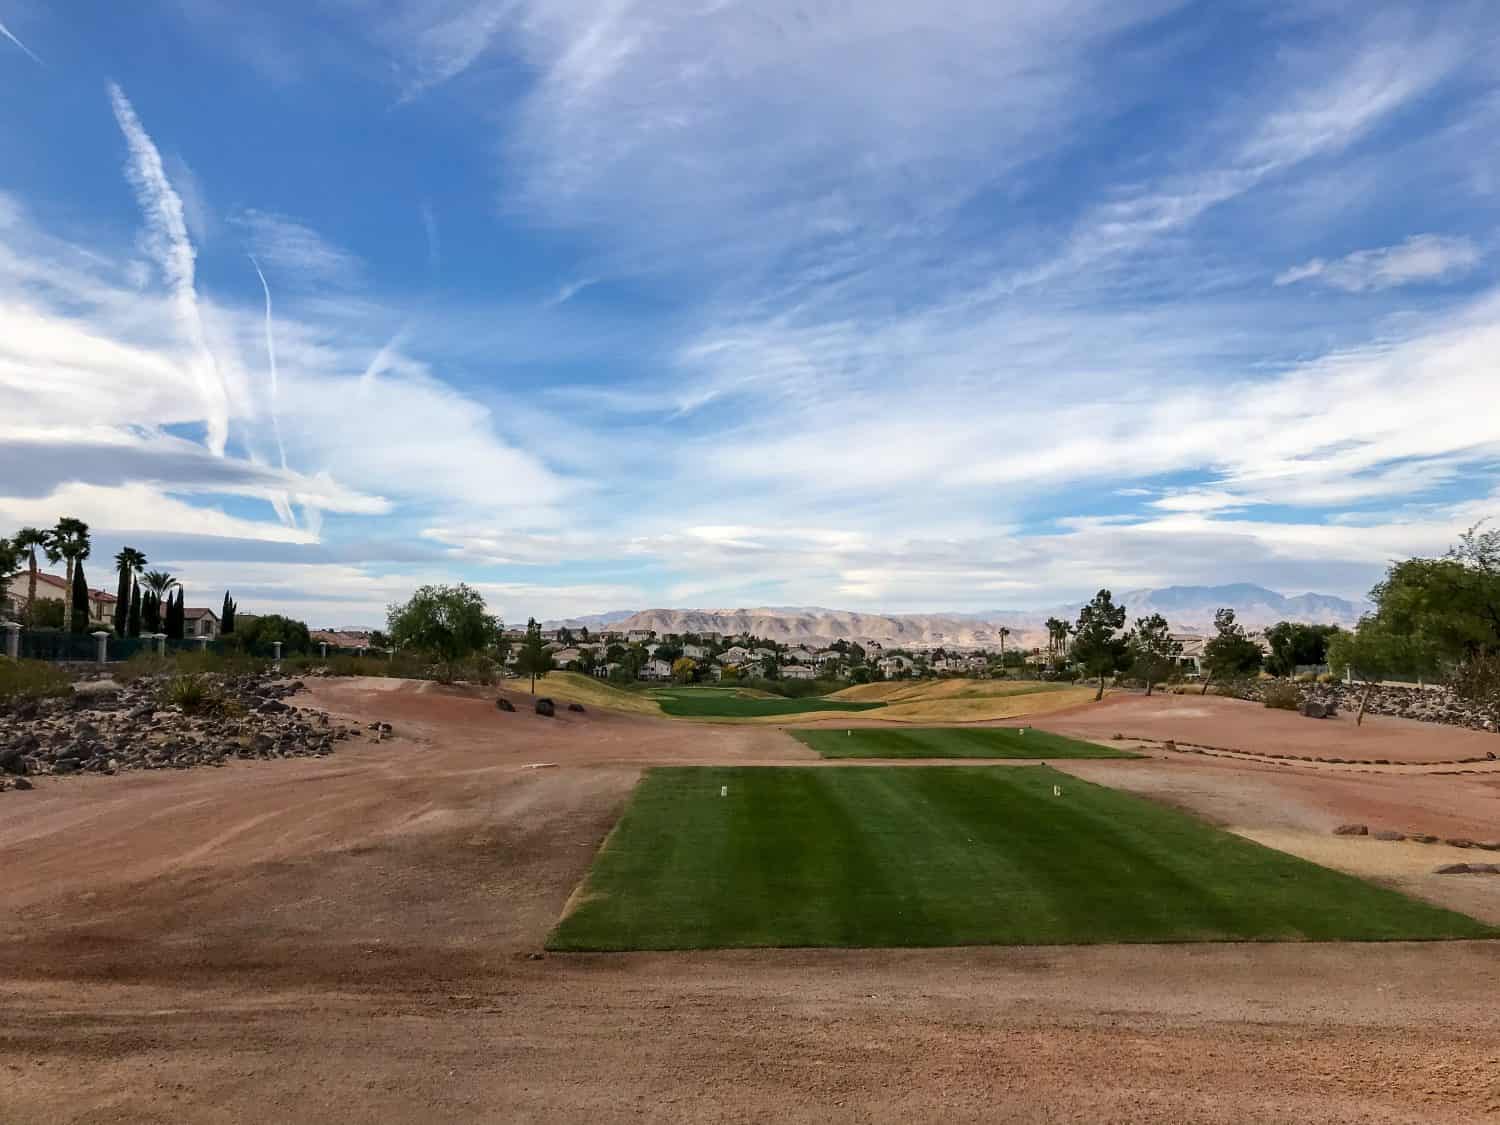 Las Vegas, Nevada - May 20, 2022: Views of the mountain background from the tee box at the Rio Secco golf course just outside of Las Vegas